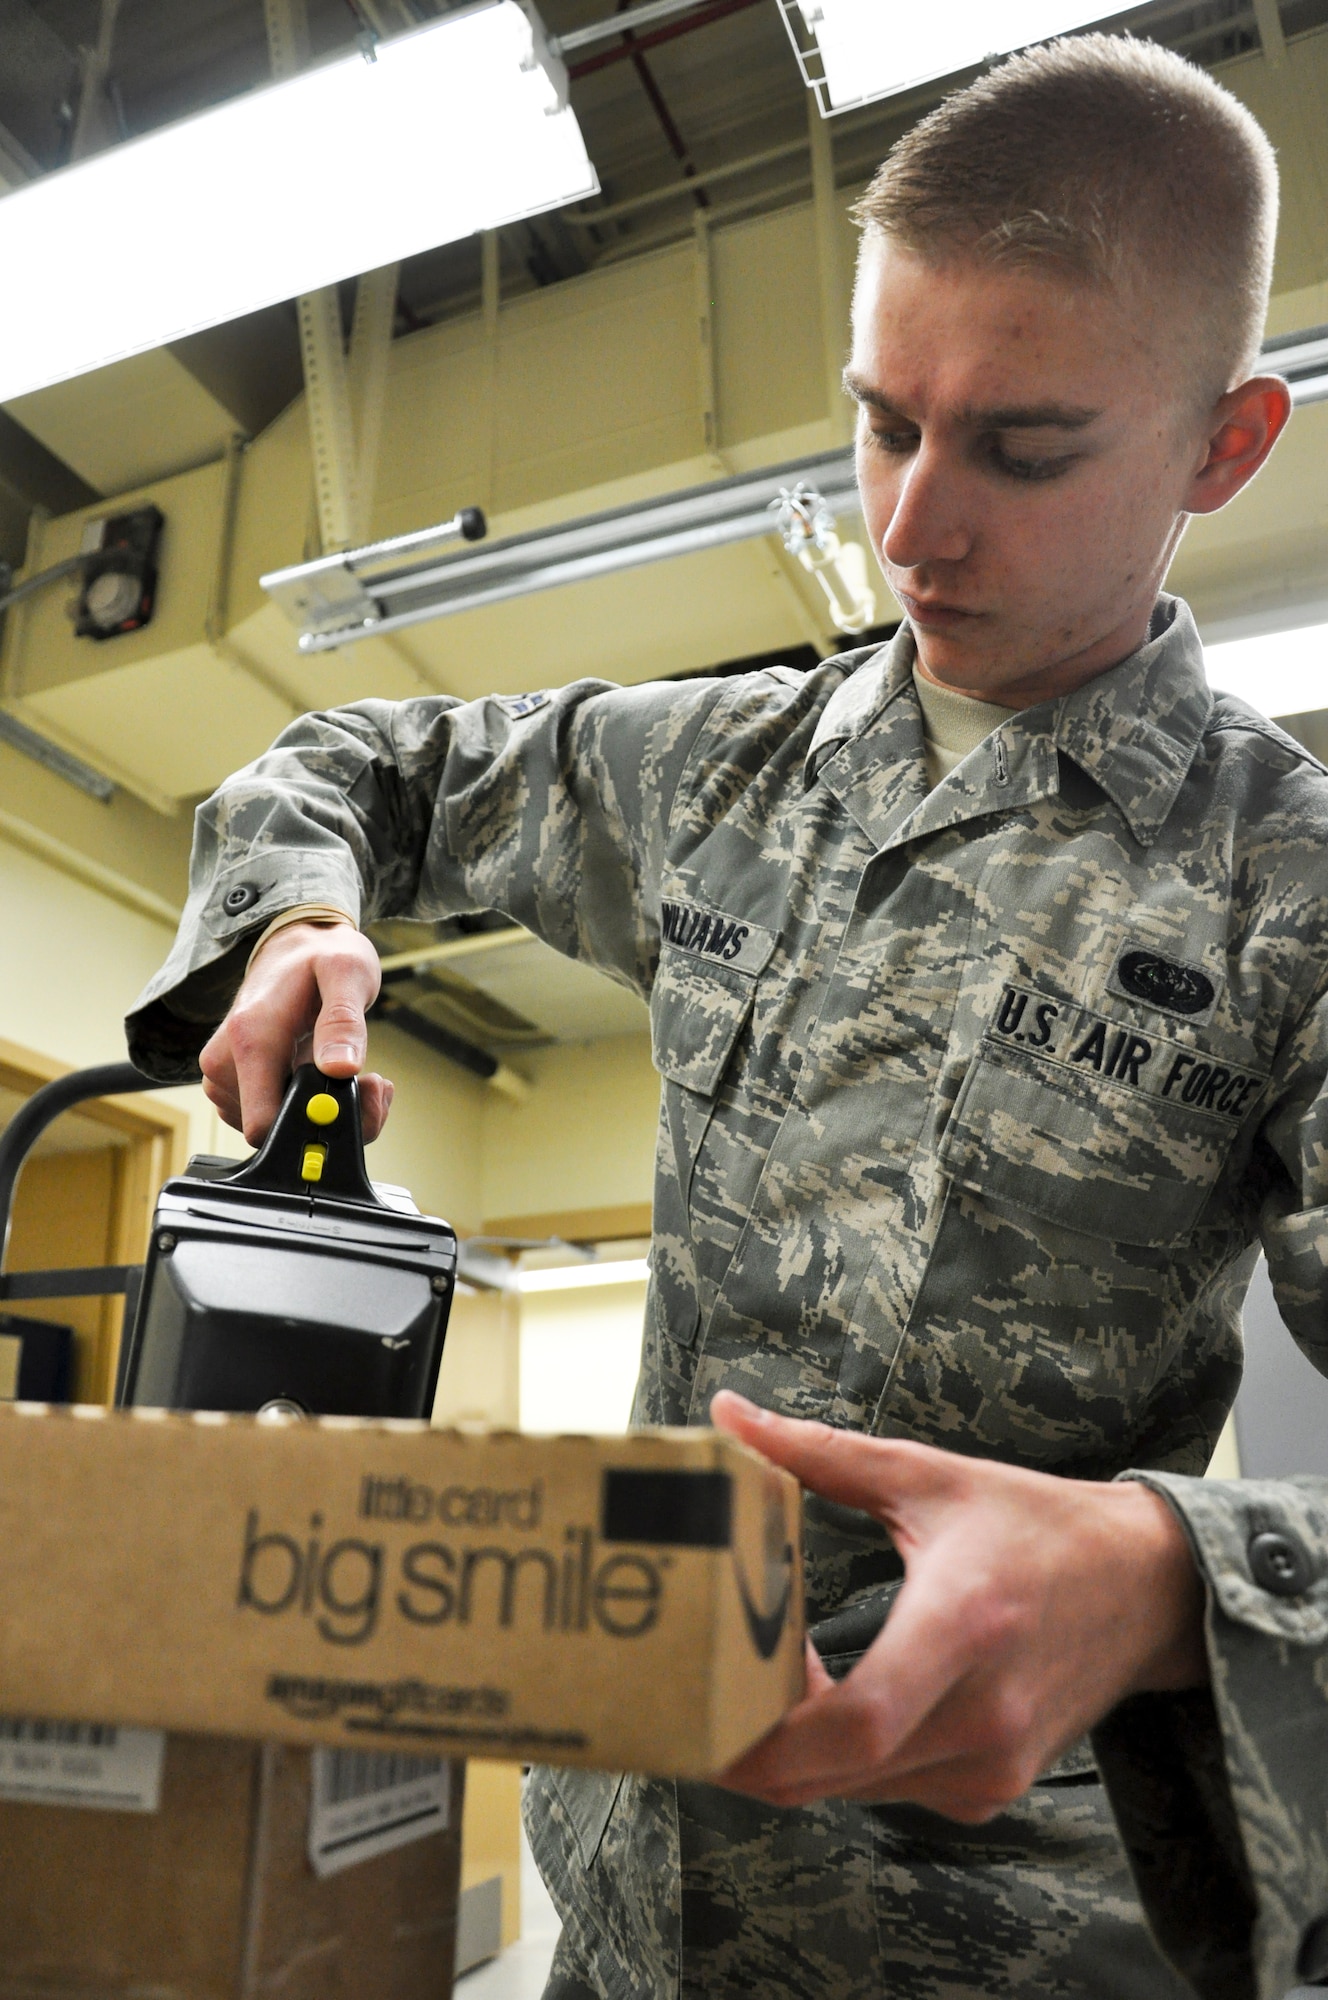 BUCLKEY AIR FORCE BASE, Colo. – Airman 1st Class Dyalan Williams, Buckley’s Official Mail Center internal mail technician, scans a package for biological and explosive material.  The mail center can process anywhere from approximately 2,000 to 12,000 pieces of mail each day.  (U.S. Air Force photo by Staff Sgt. Nicholas Rau)